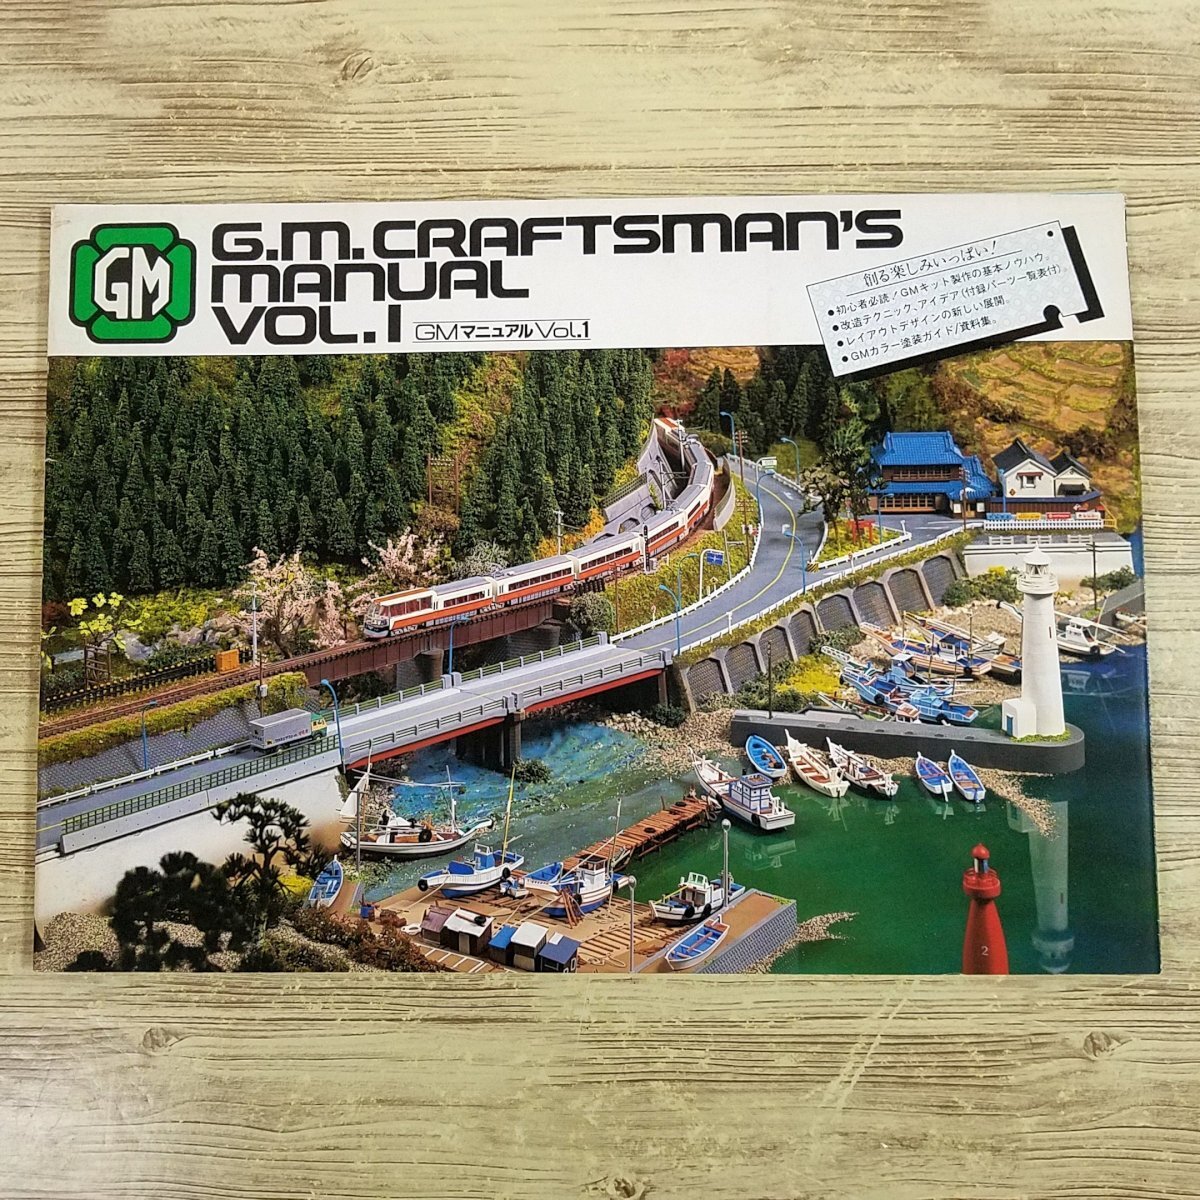  railroad model [ green Max GM manual Vol.1] 1986 year N gauge assembly modified painting [ postage 180 jpy ]